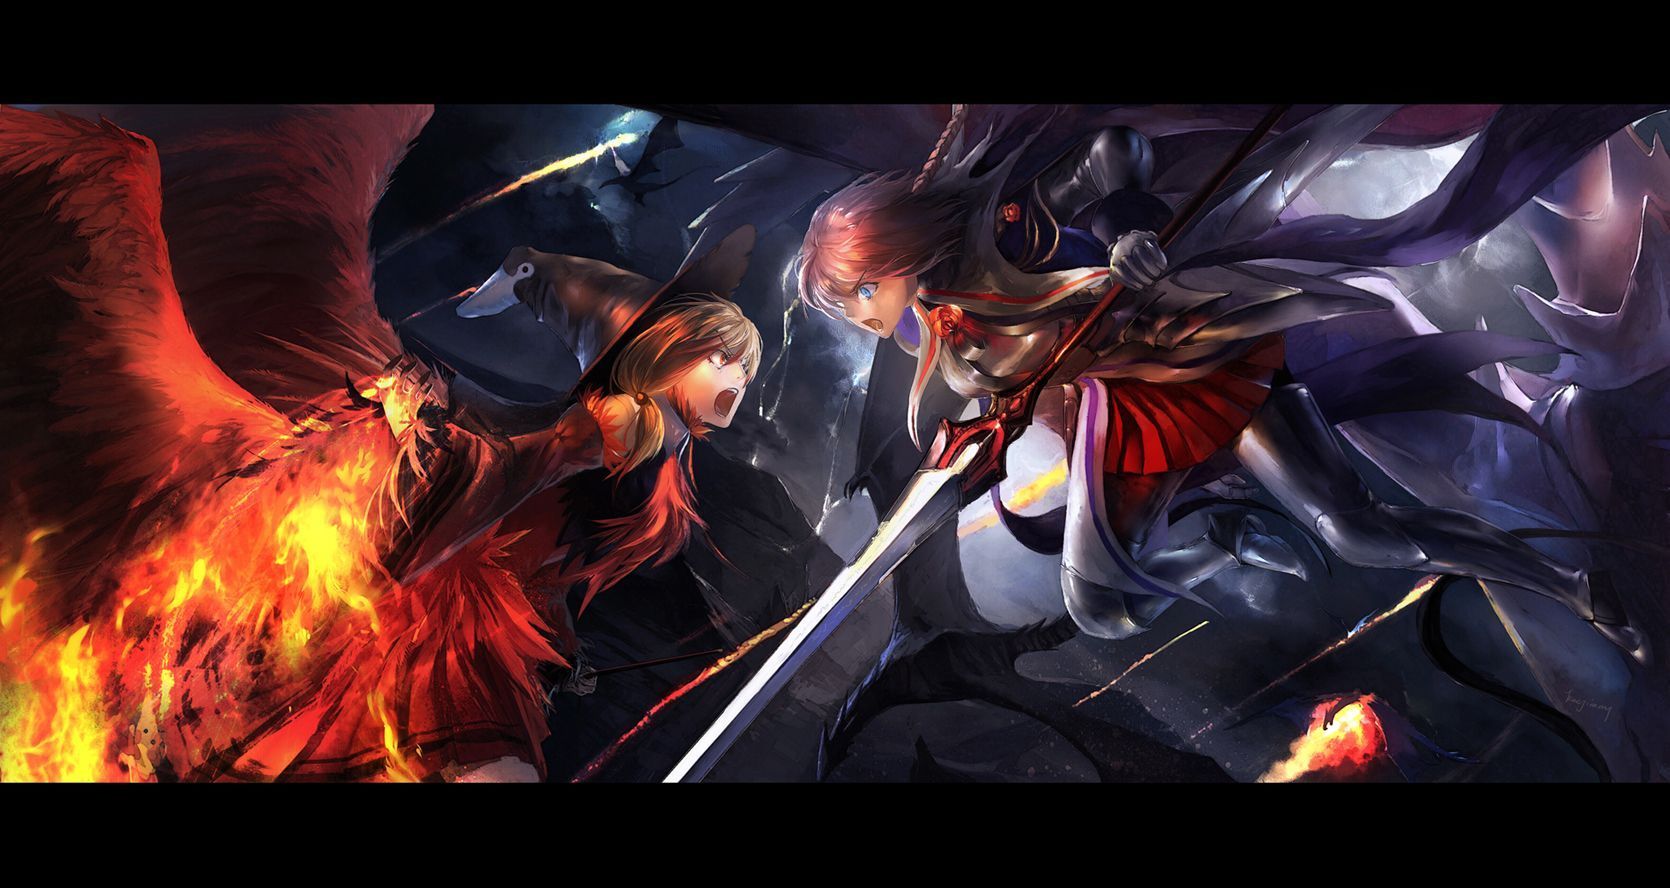 Epic Anime Fighting Wallpaper High Definition. Anime background, Cool anime wallpaper, Anime